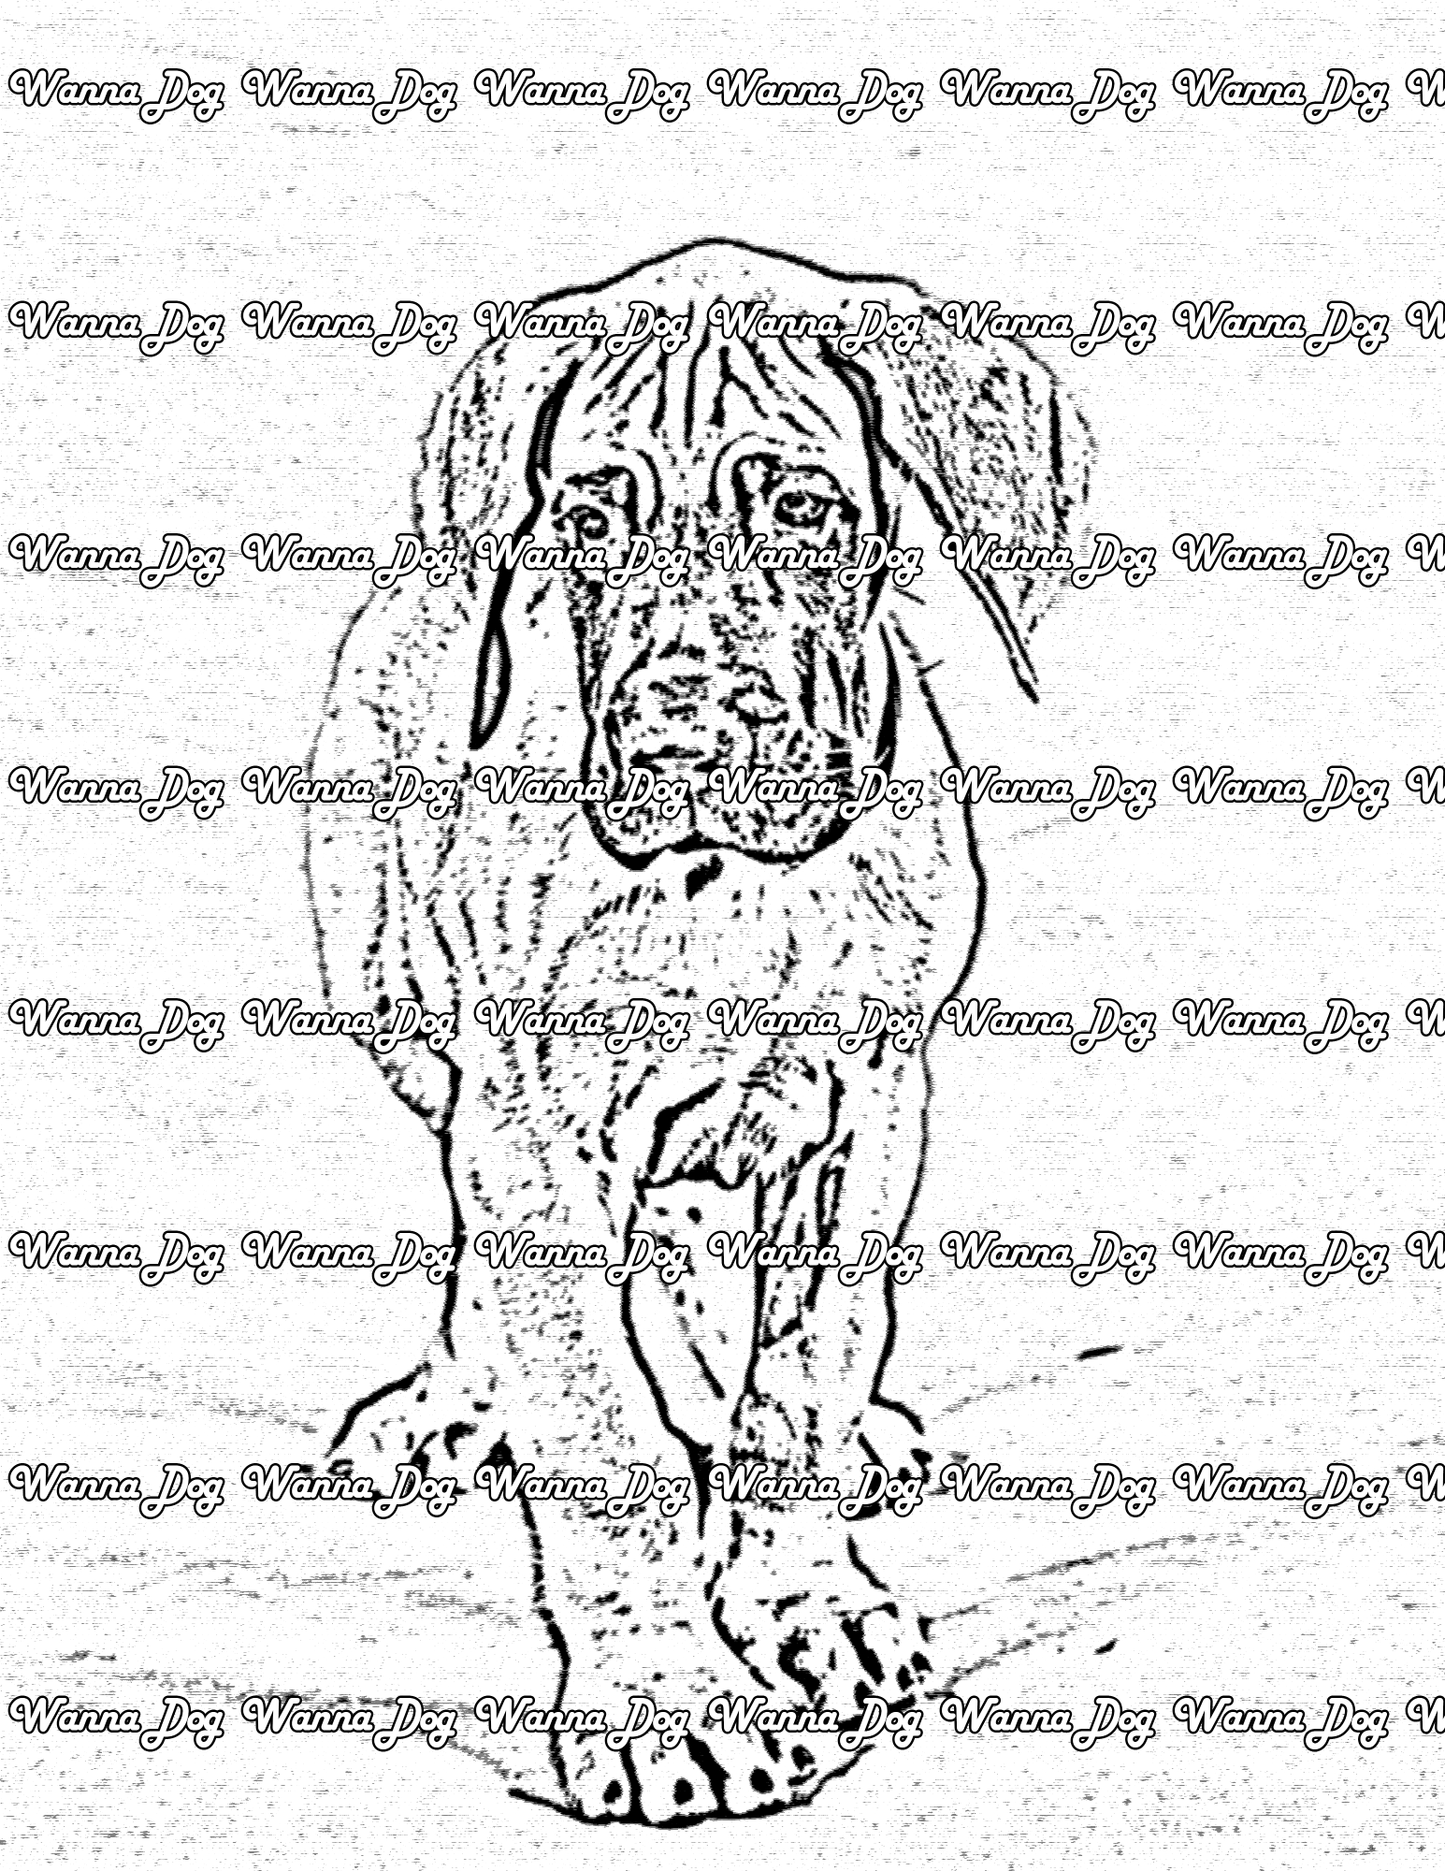 Great Dane Coloring Page of a Great Dane puppy standing